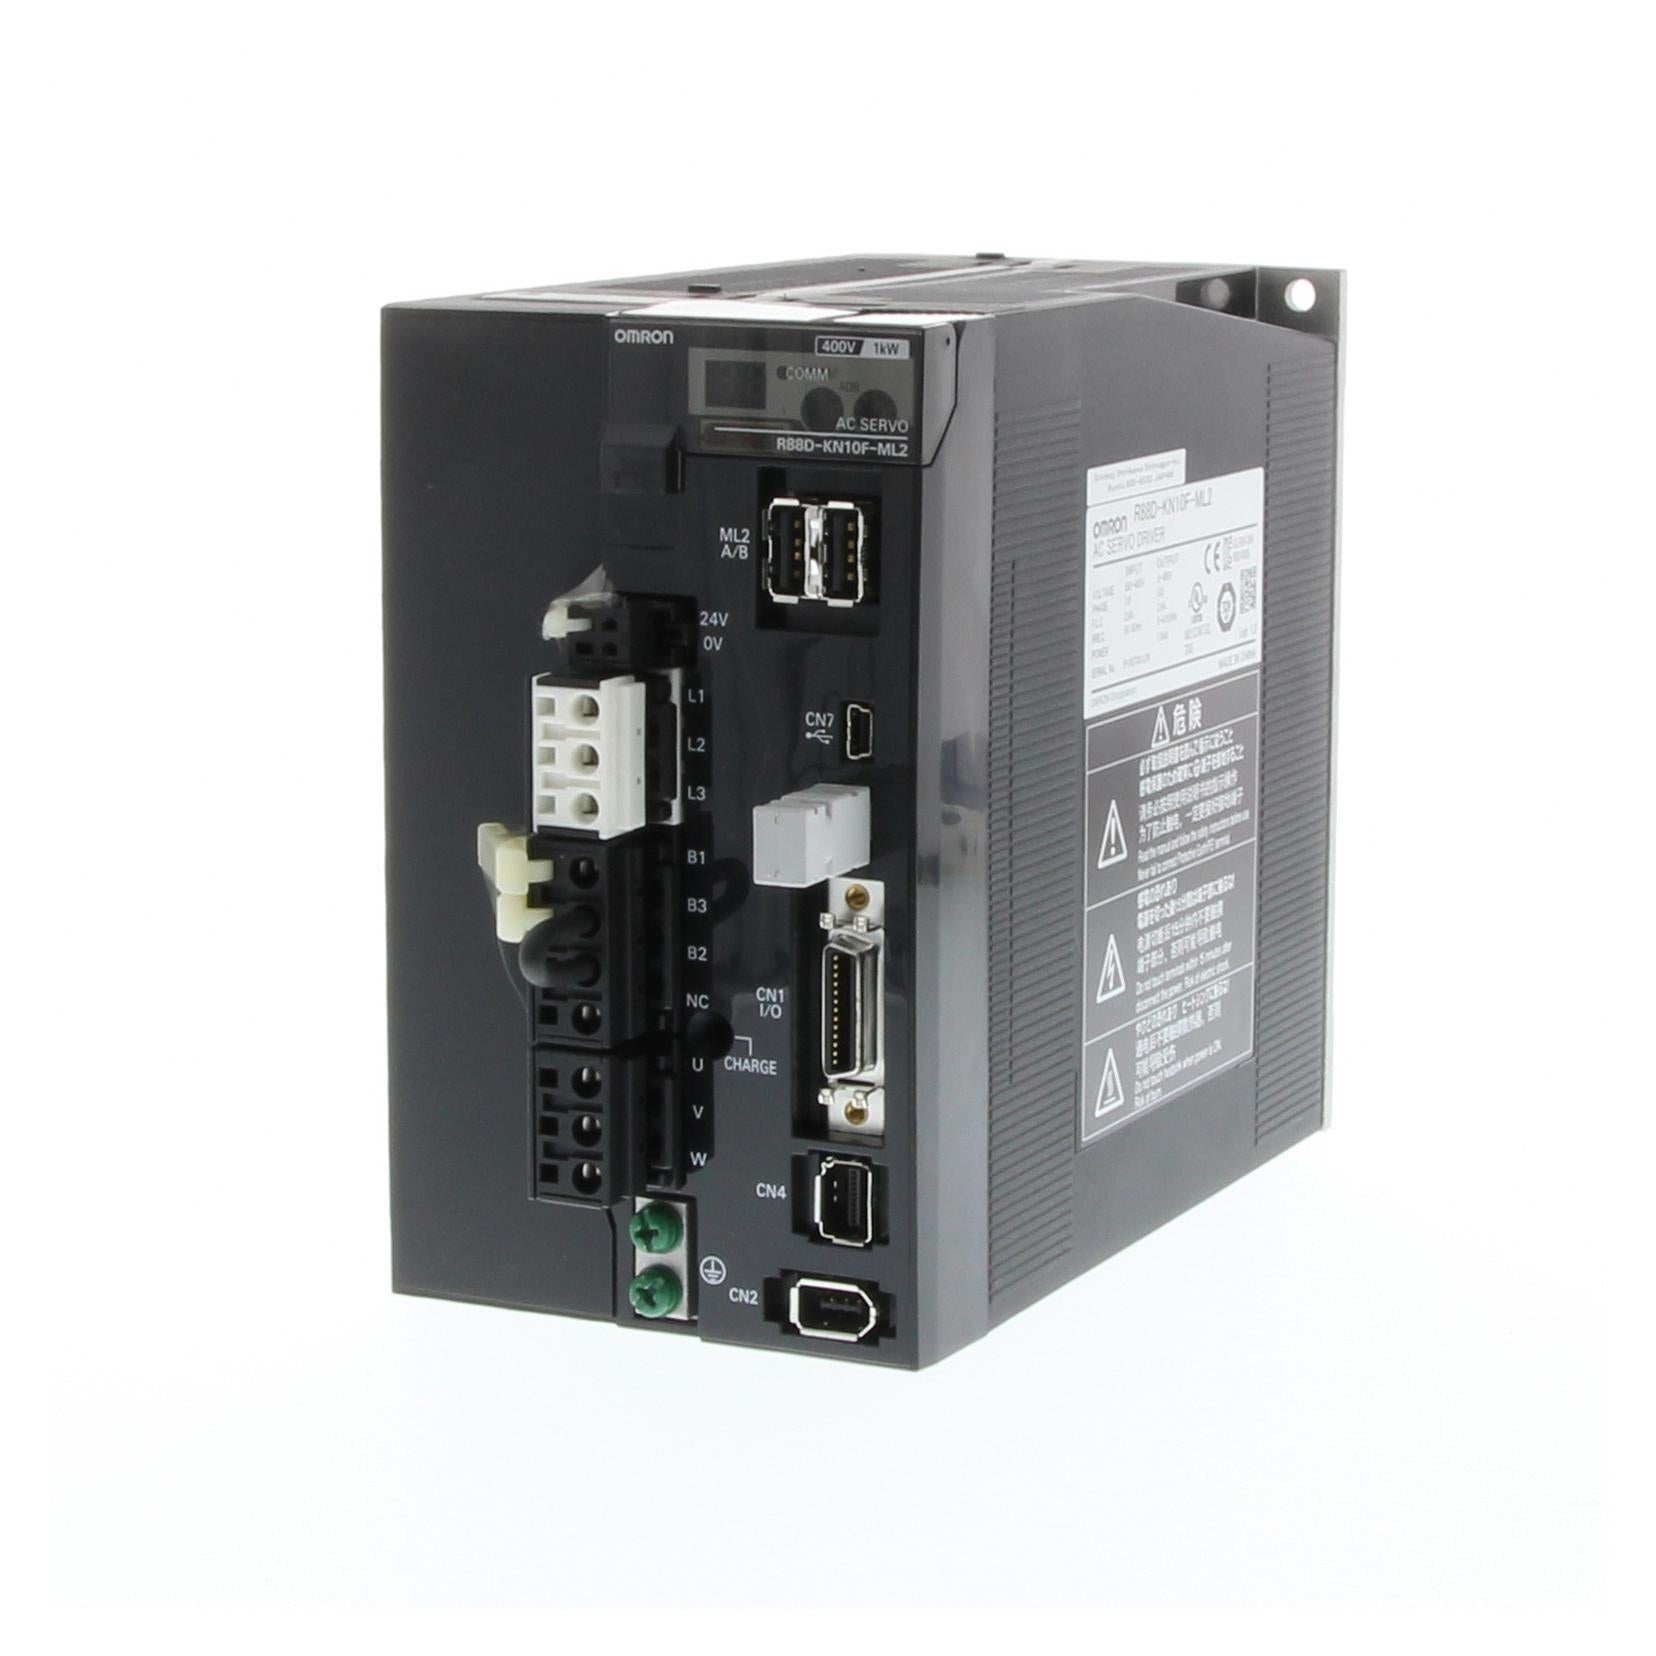 R88D-KN20F-ML2 AC MOTOR SPEED CONTROLLERS OMRON